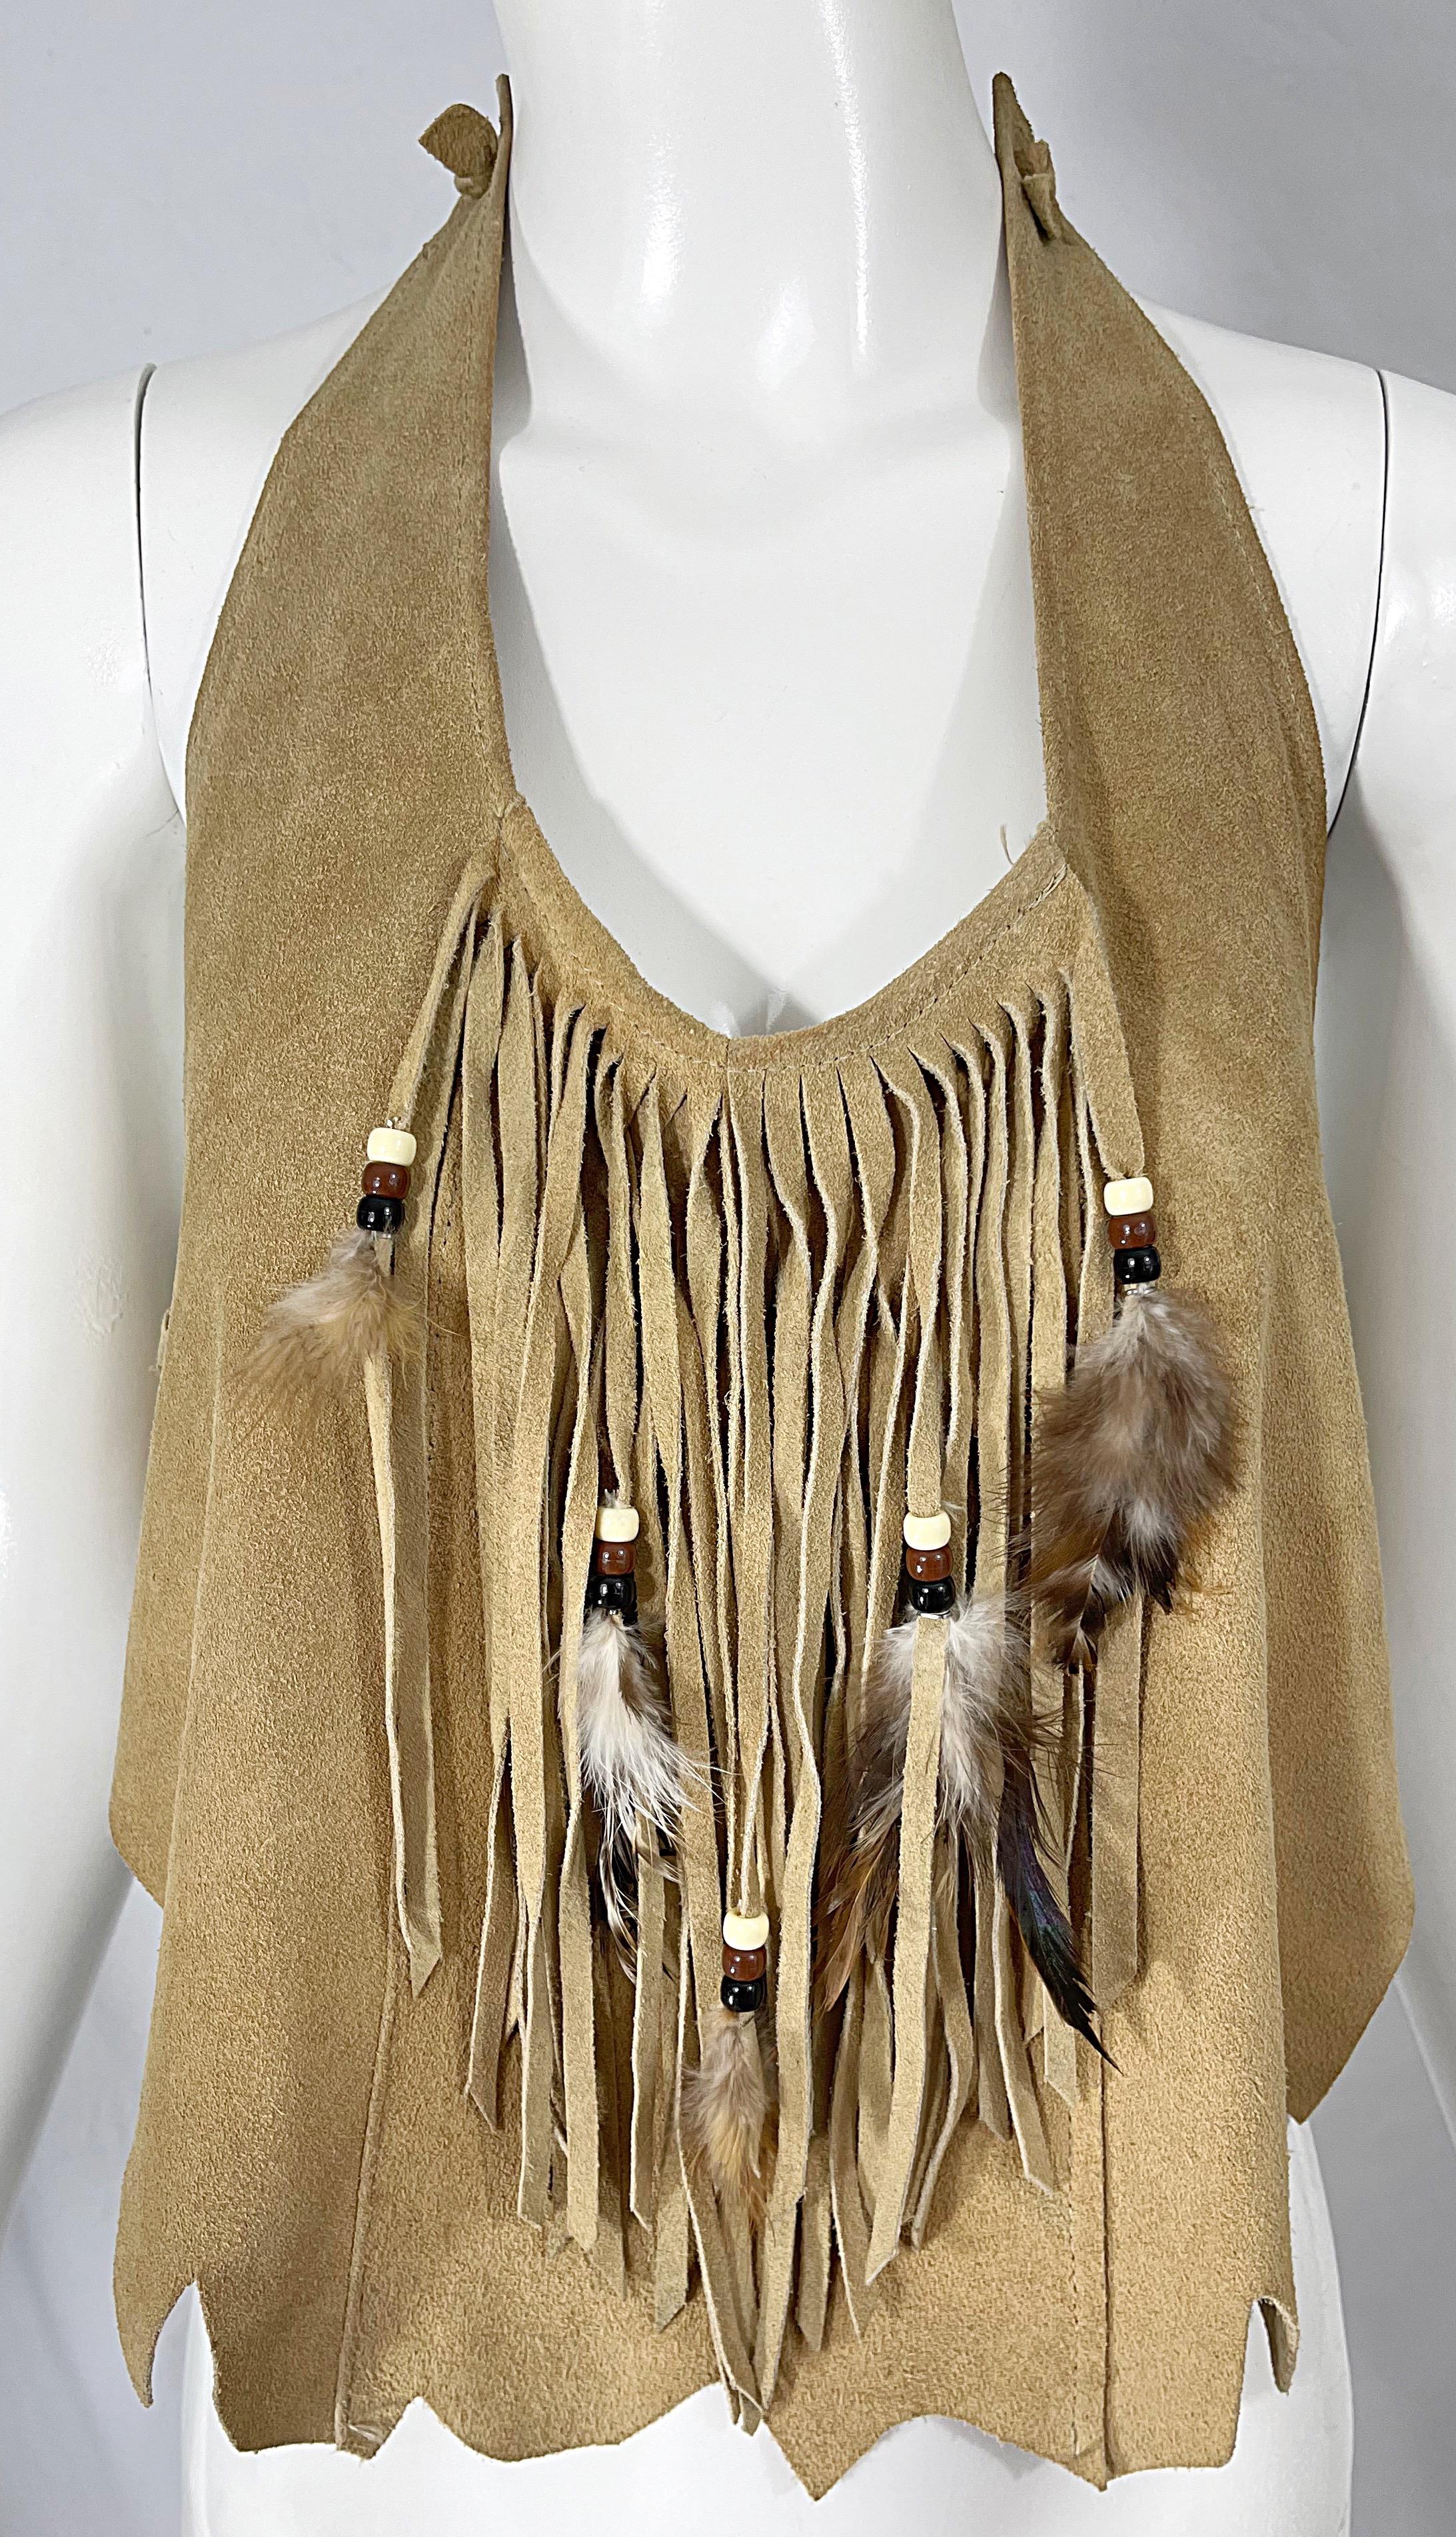 Women's 1970s Suede Leather Fringe Feather Tan Brown Boho Vintage 70s Halter Crop Top For Sale